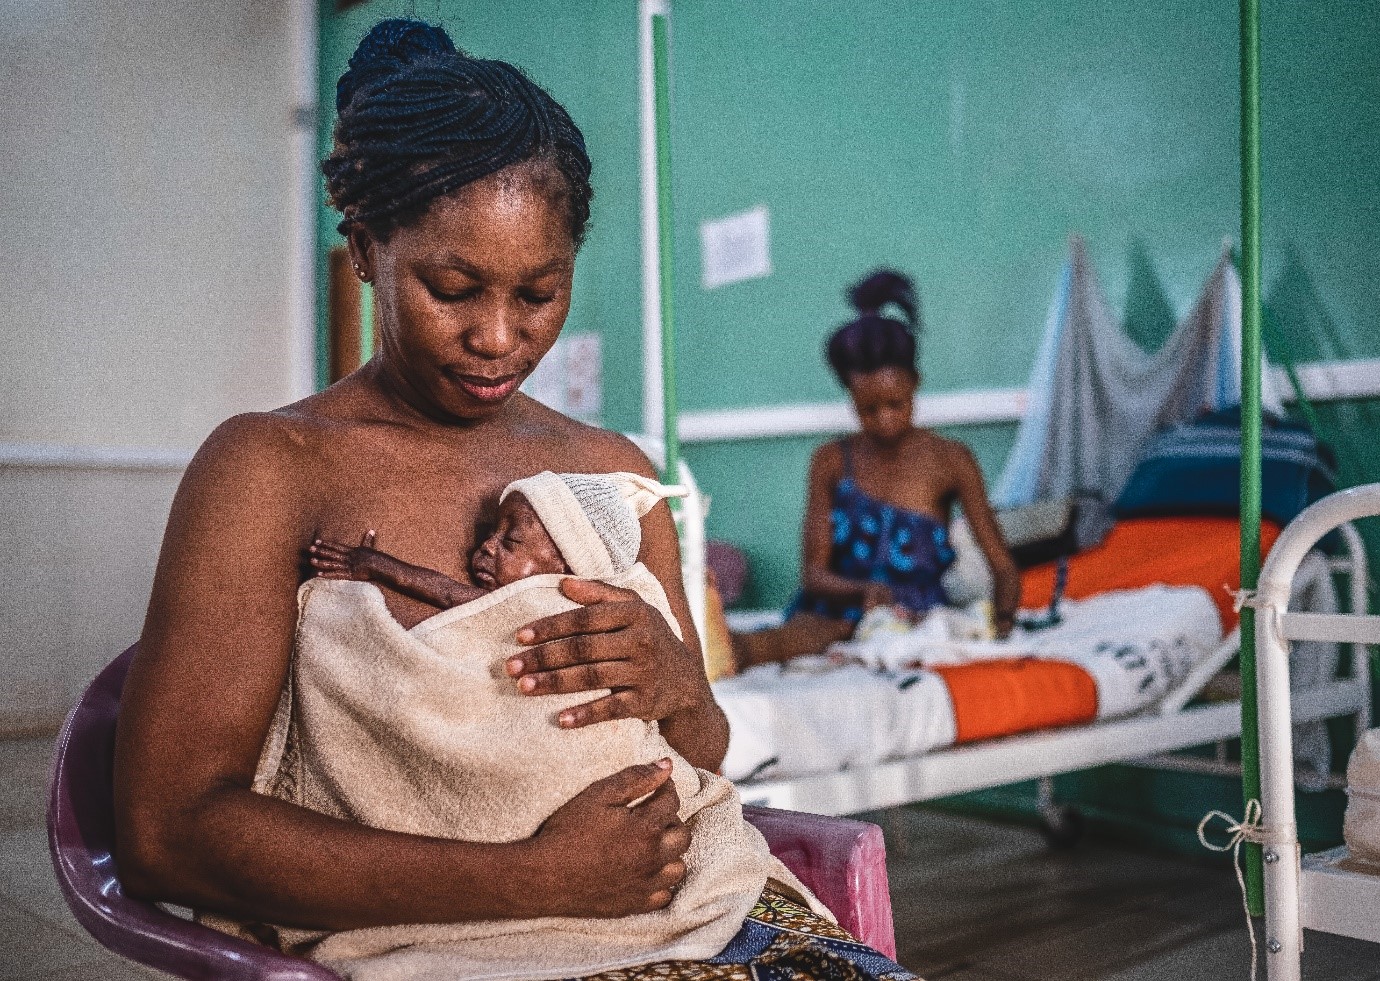 Stephanie Kamangomda with her son Archange, born prematurely at 28 weeks and who spent 45 days in the intensive care unit at CHUC. The medical teams nicknamed Archange "the general" because of his fighting spirit.